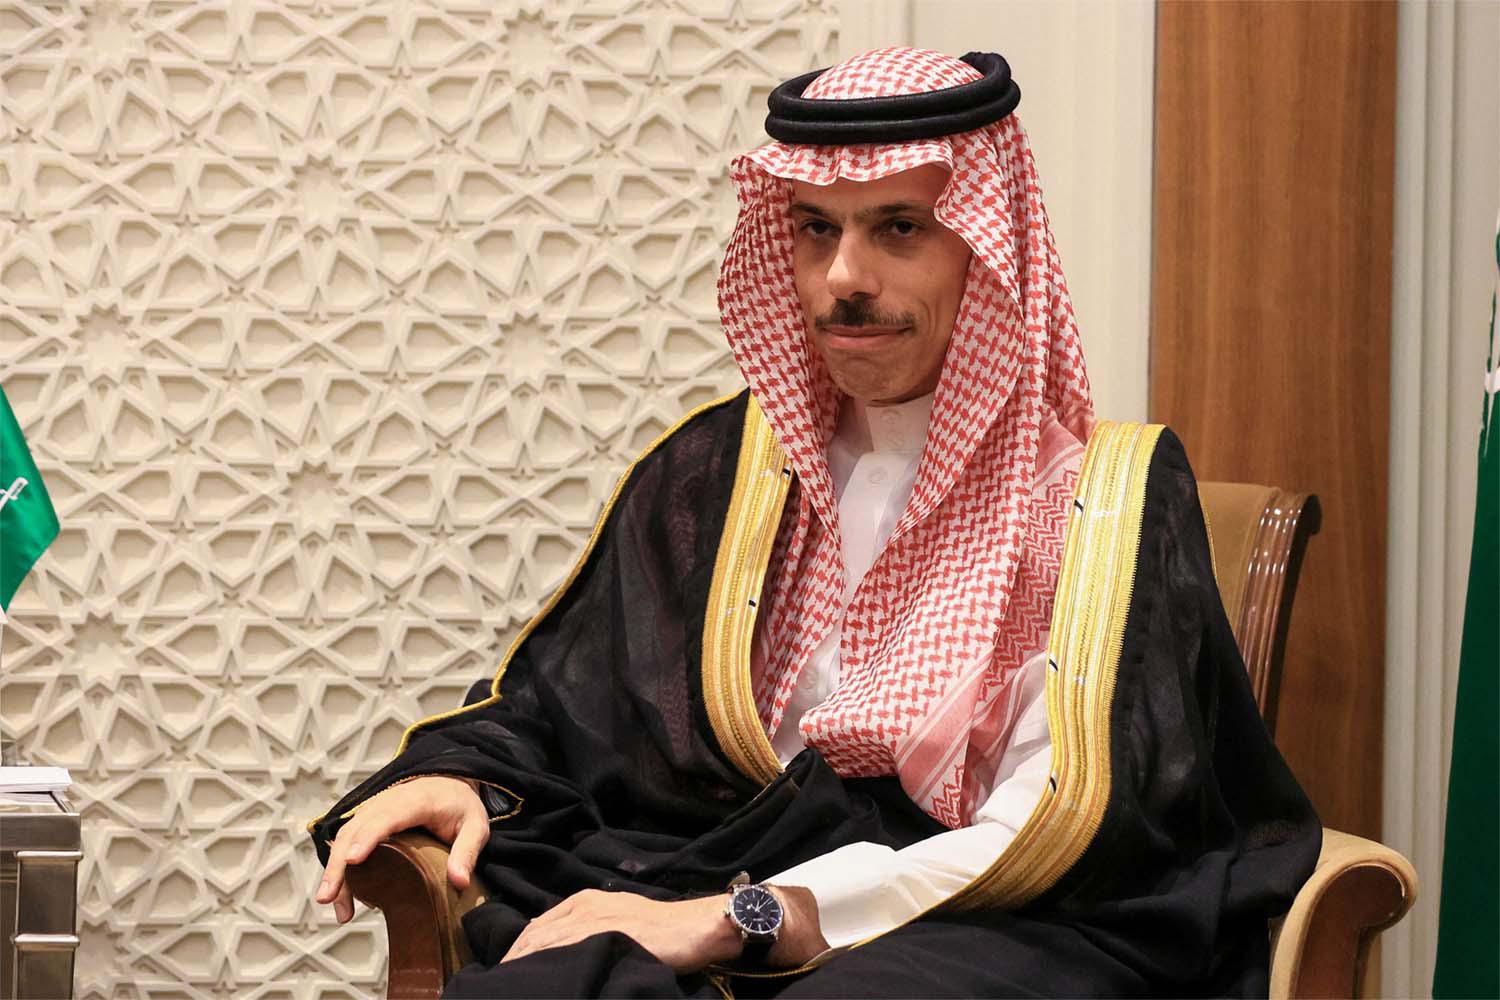 Prince Faisal says Saudi Arabia is committed to the clean energy future